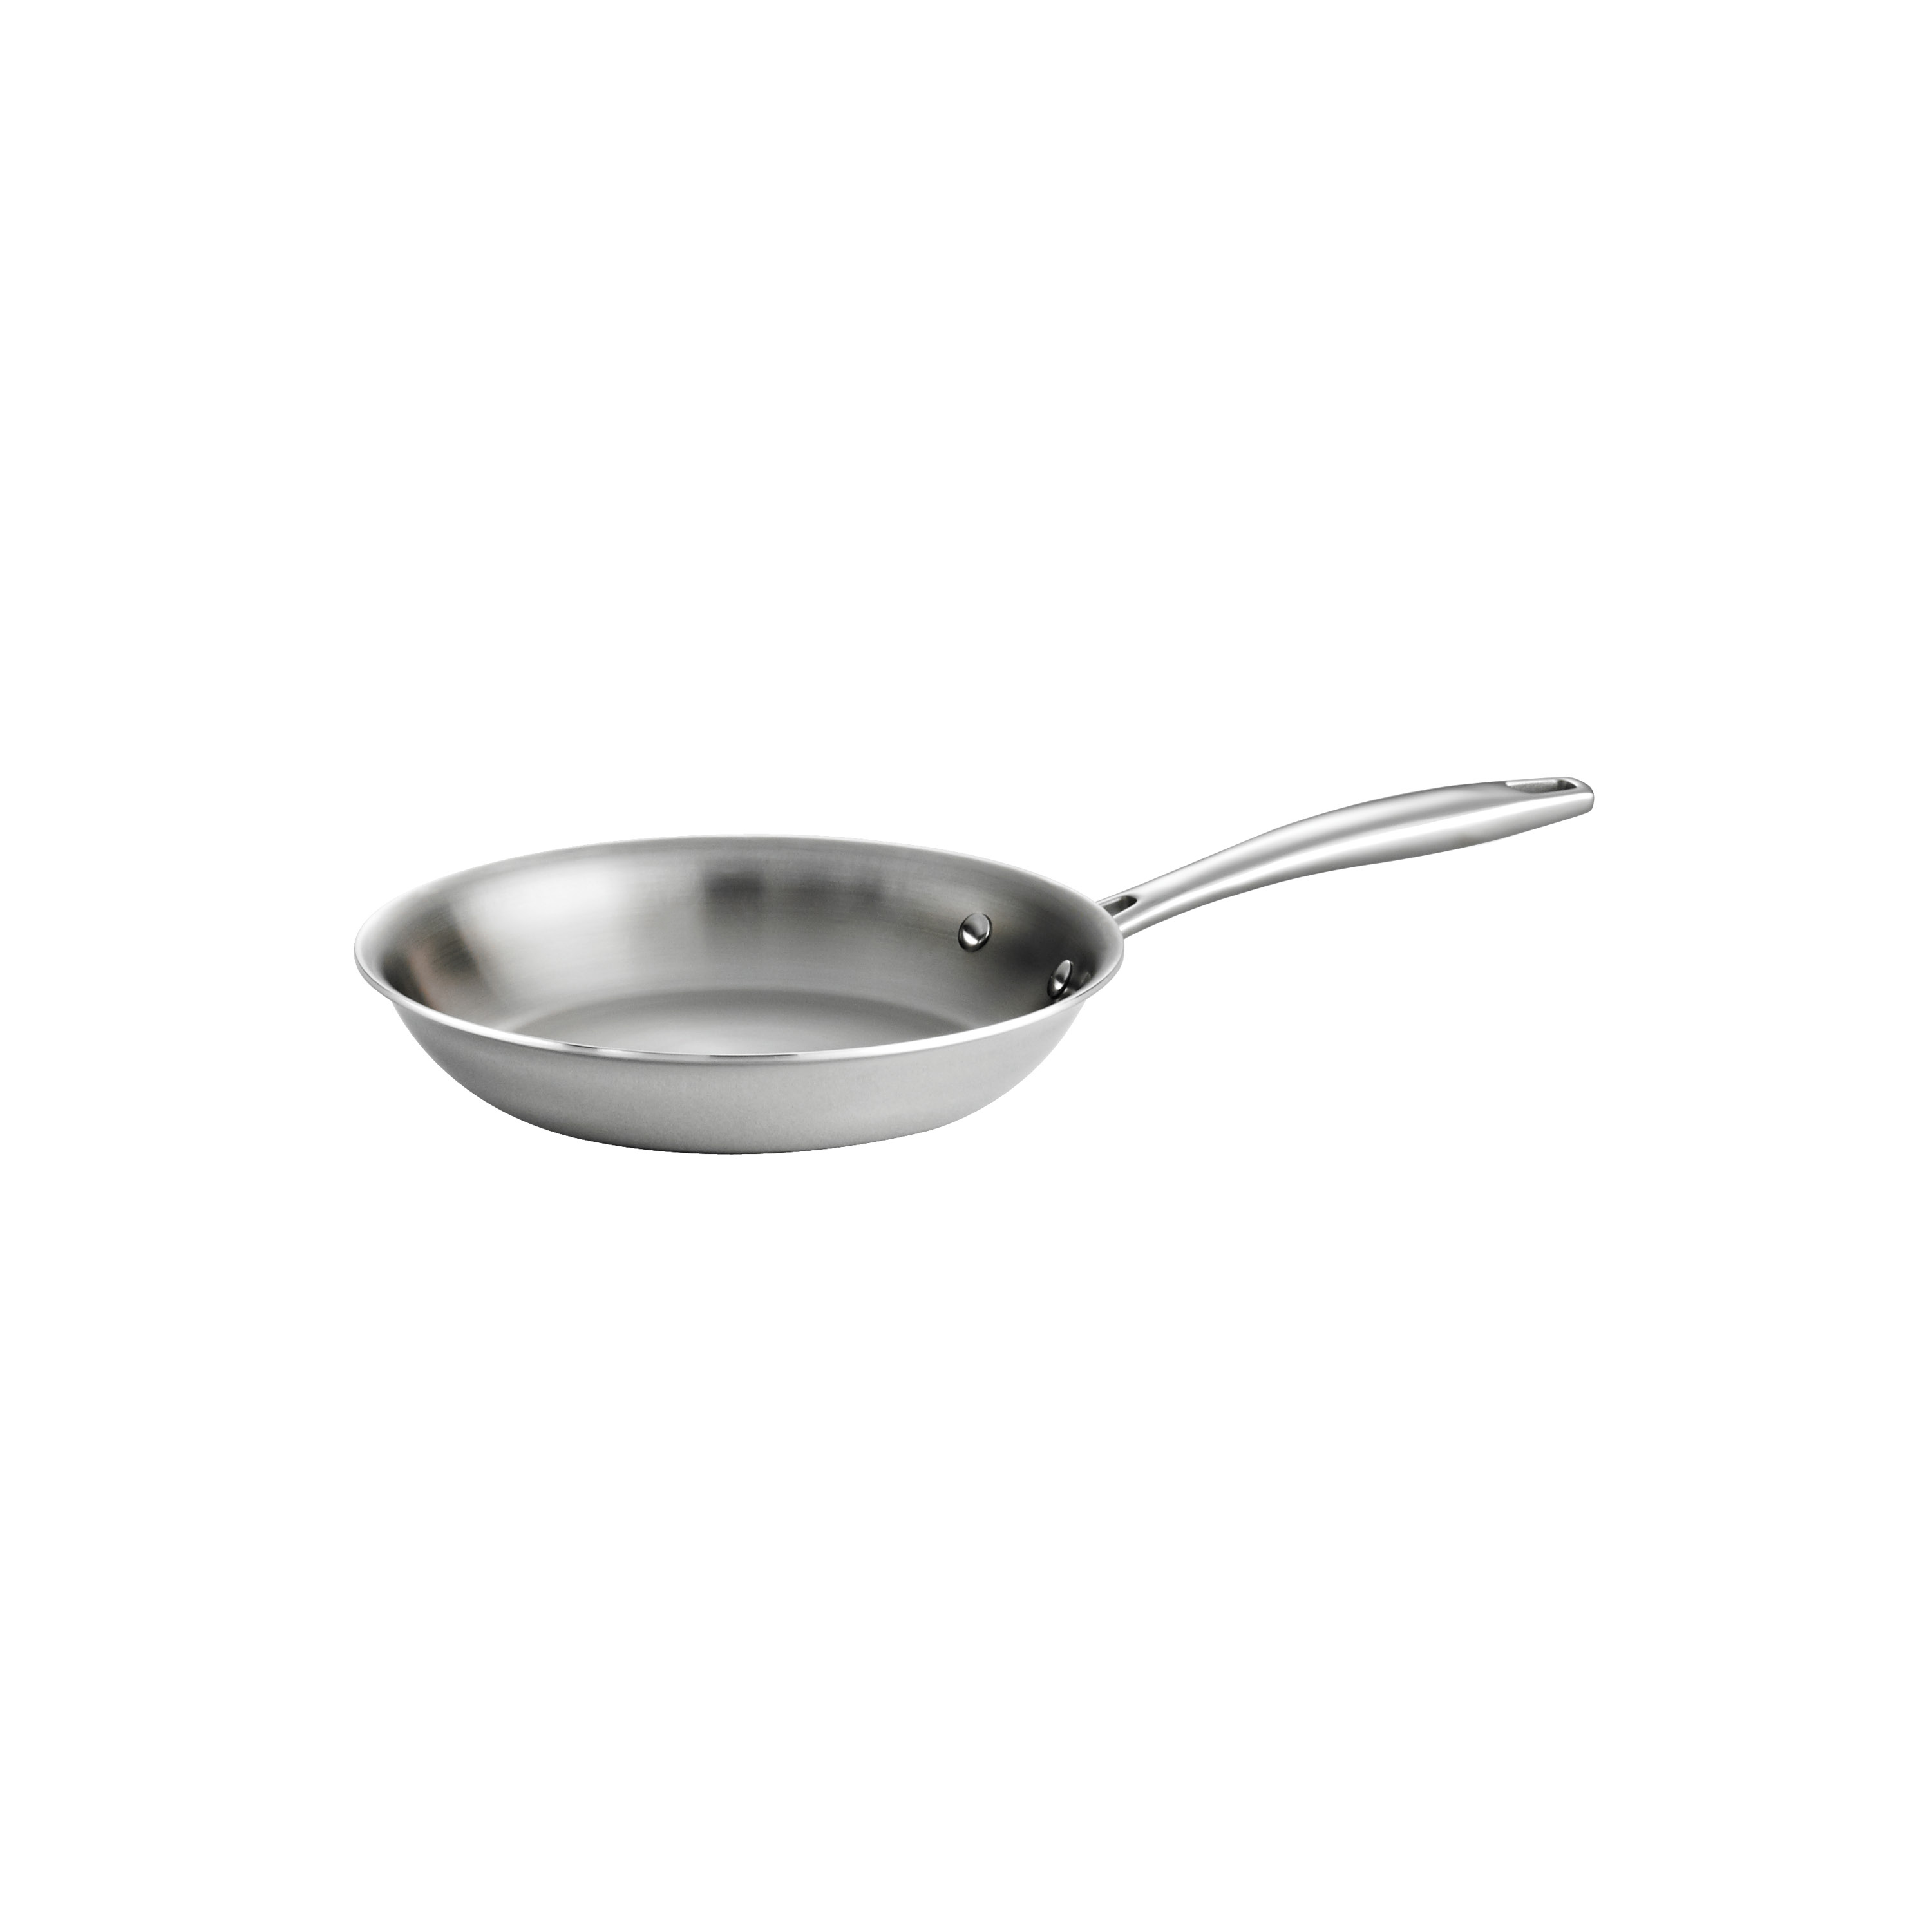 0016017100398 - GOURMET -TRI-PLY CLAD 18/10 STAINLESS STEEL INDUCTION-READY 8 IN FRY PAN